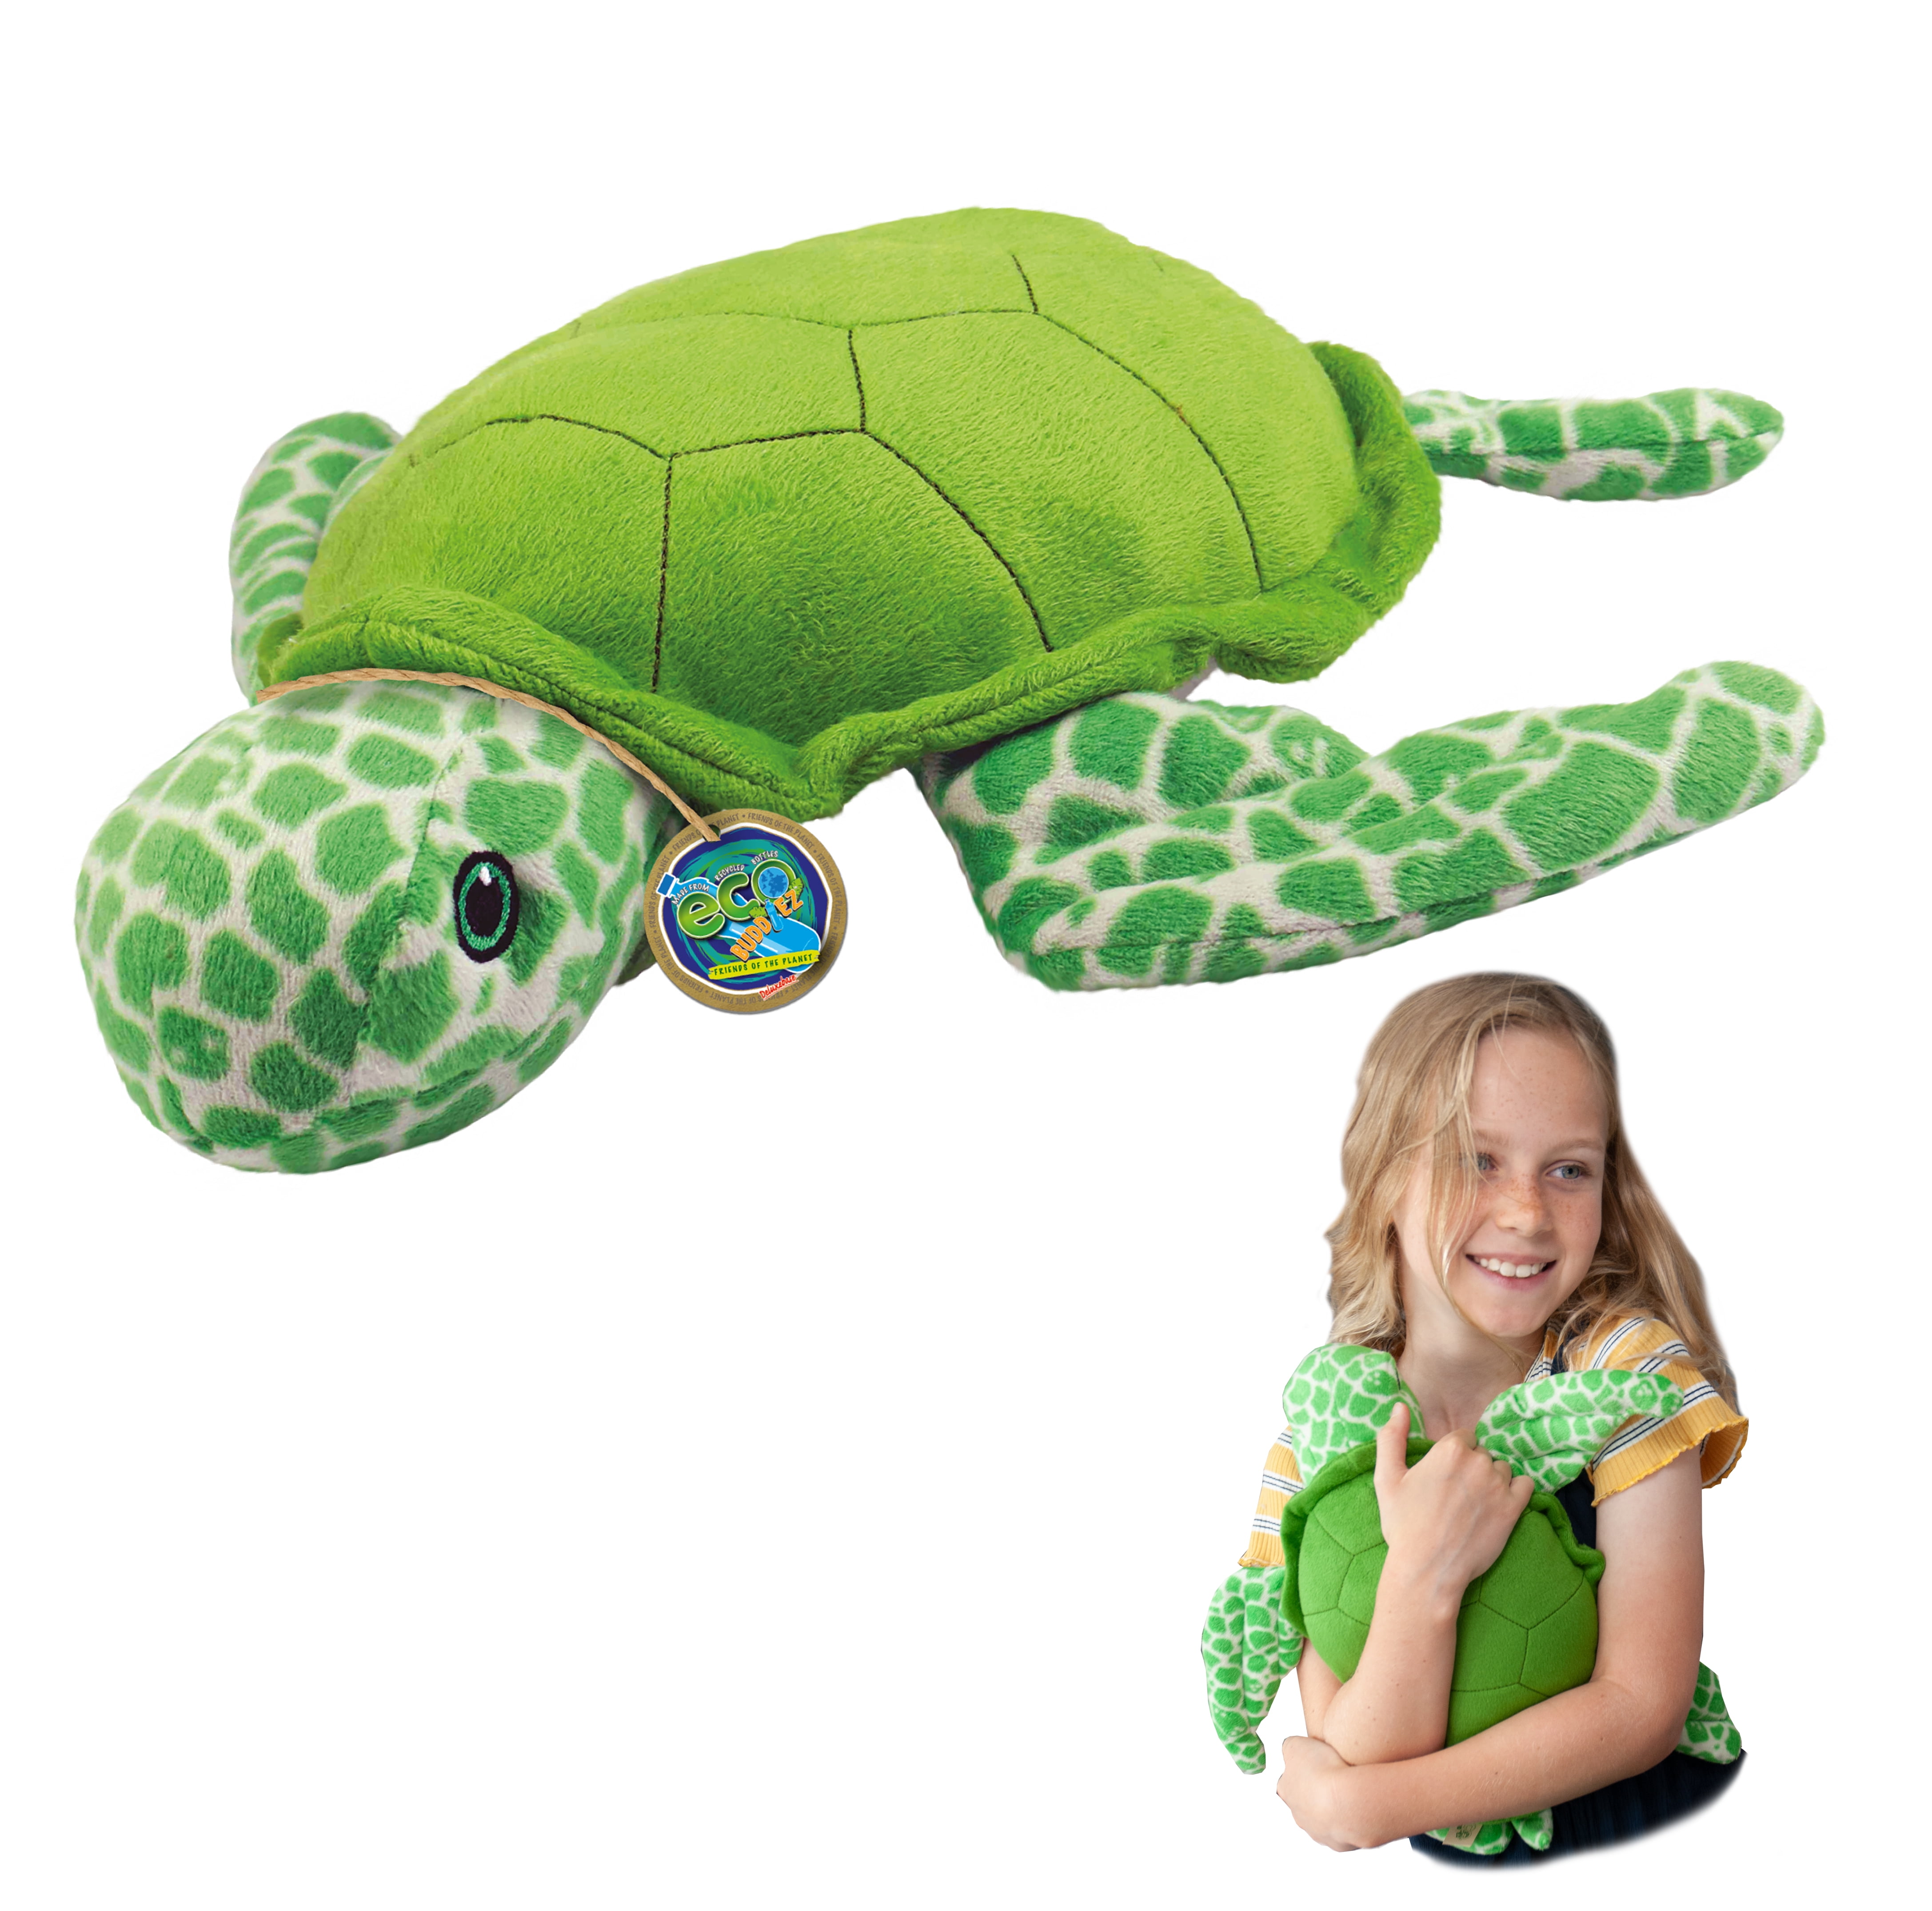 Green Sea Turtle 17 Inch Plush Stuffed Toy Marine Reptile Animal Gift for sale online 